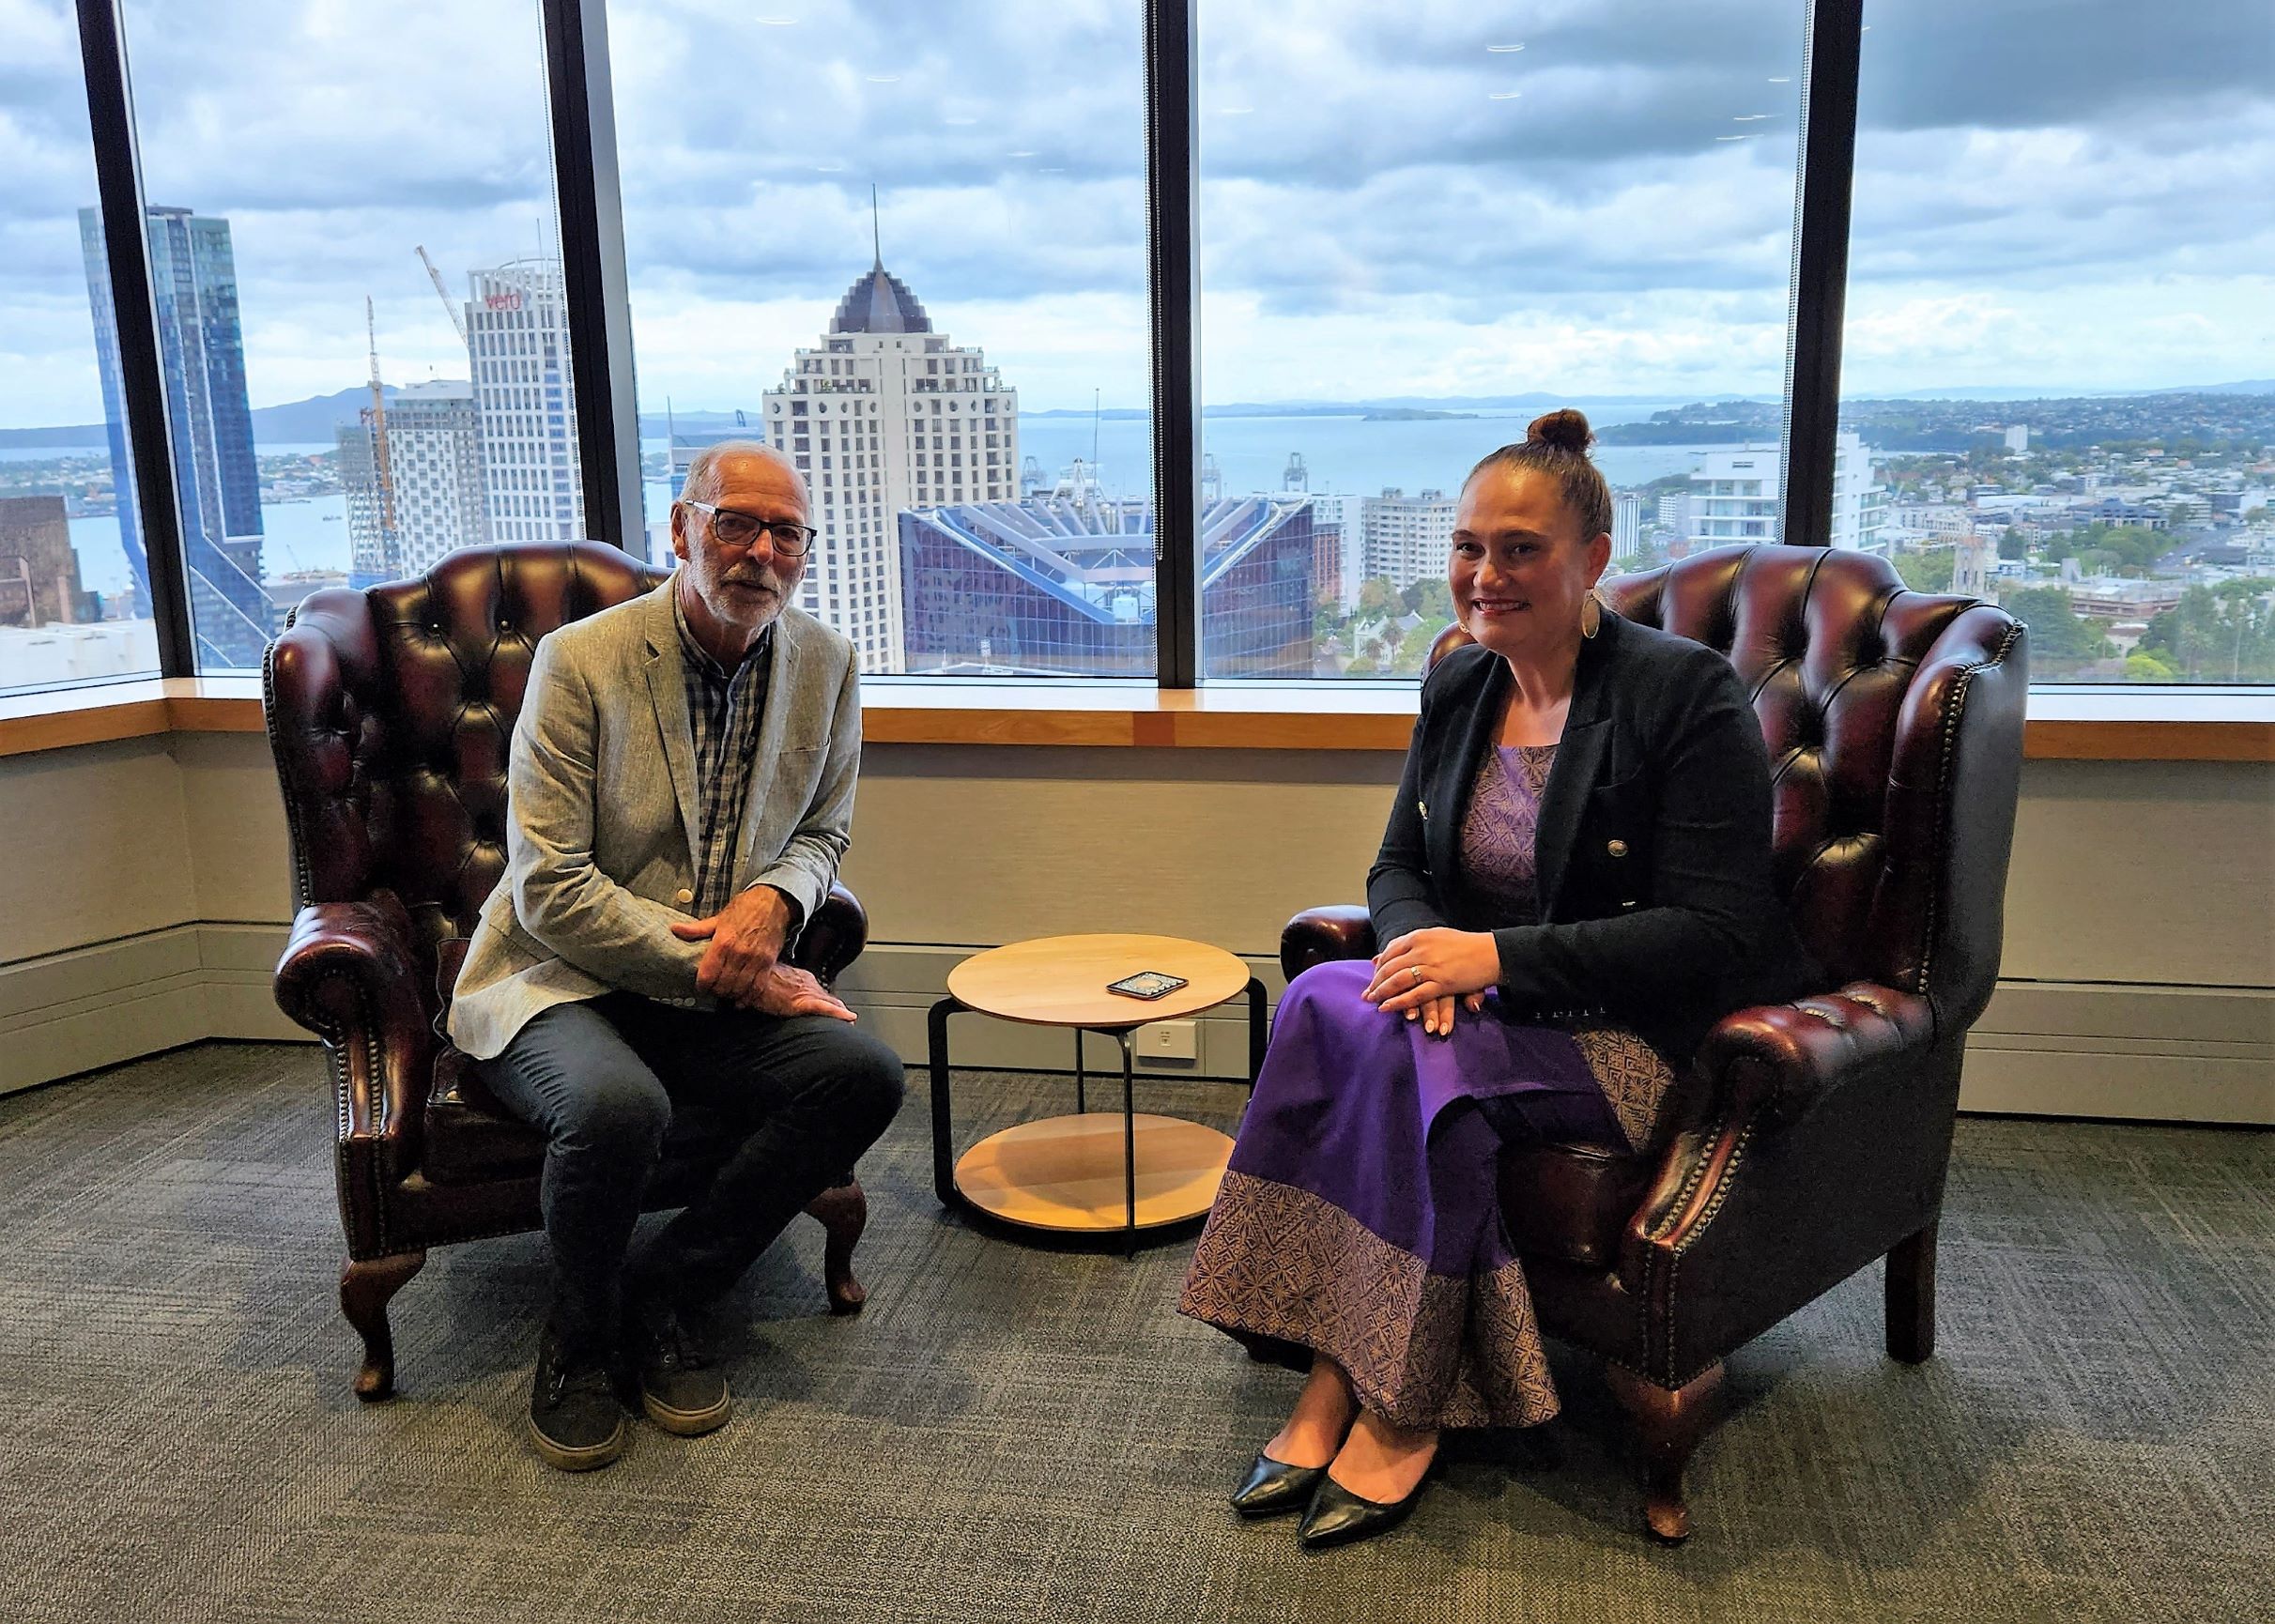 Auckland Mayor and Social Development Minister meet to break the cycle